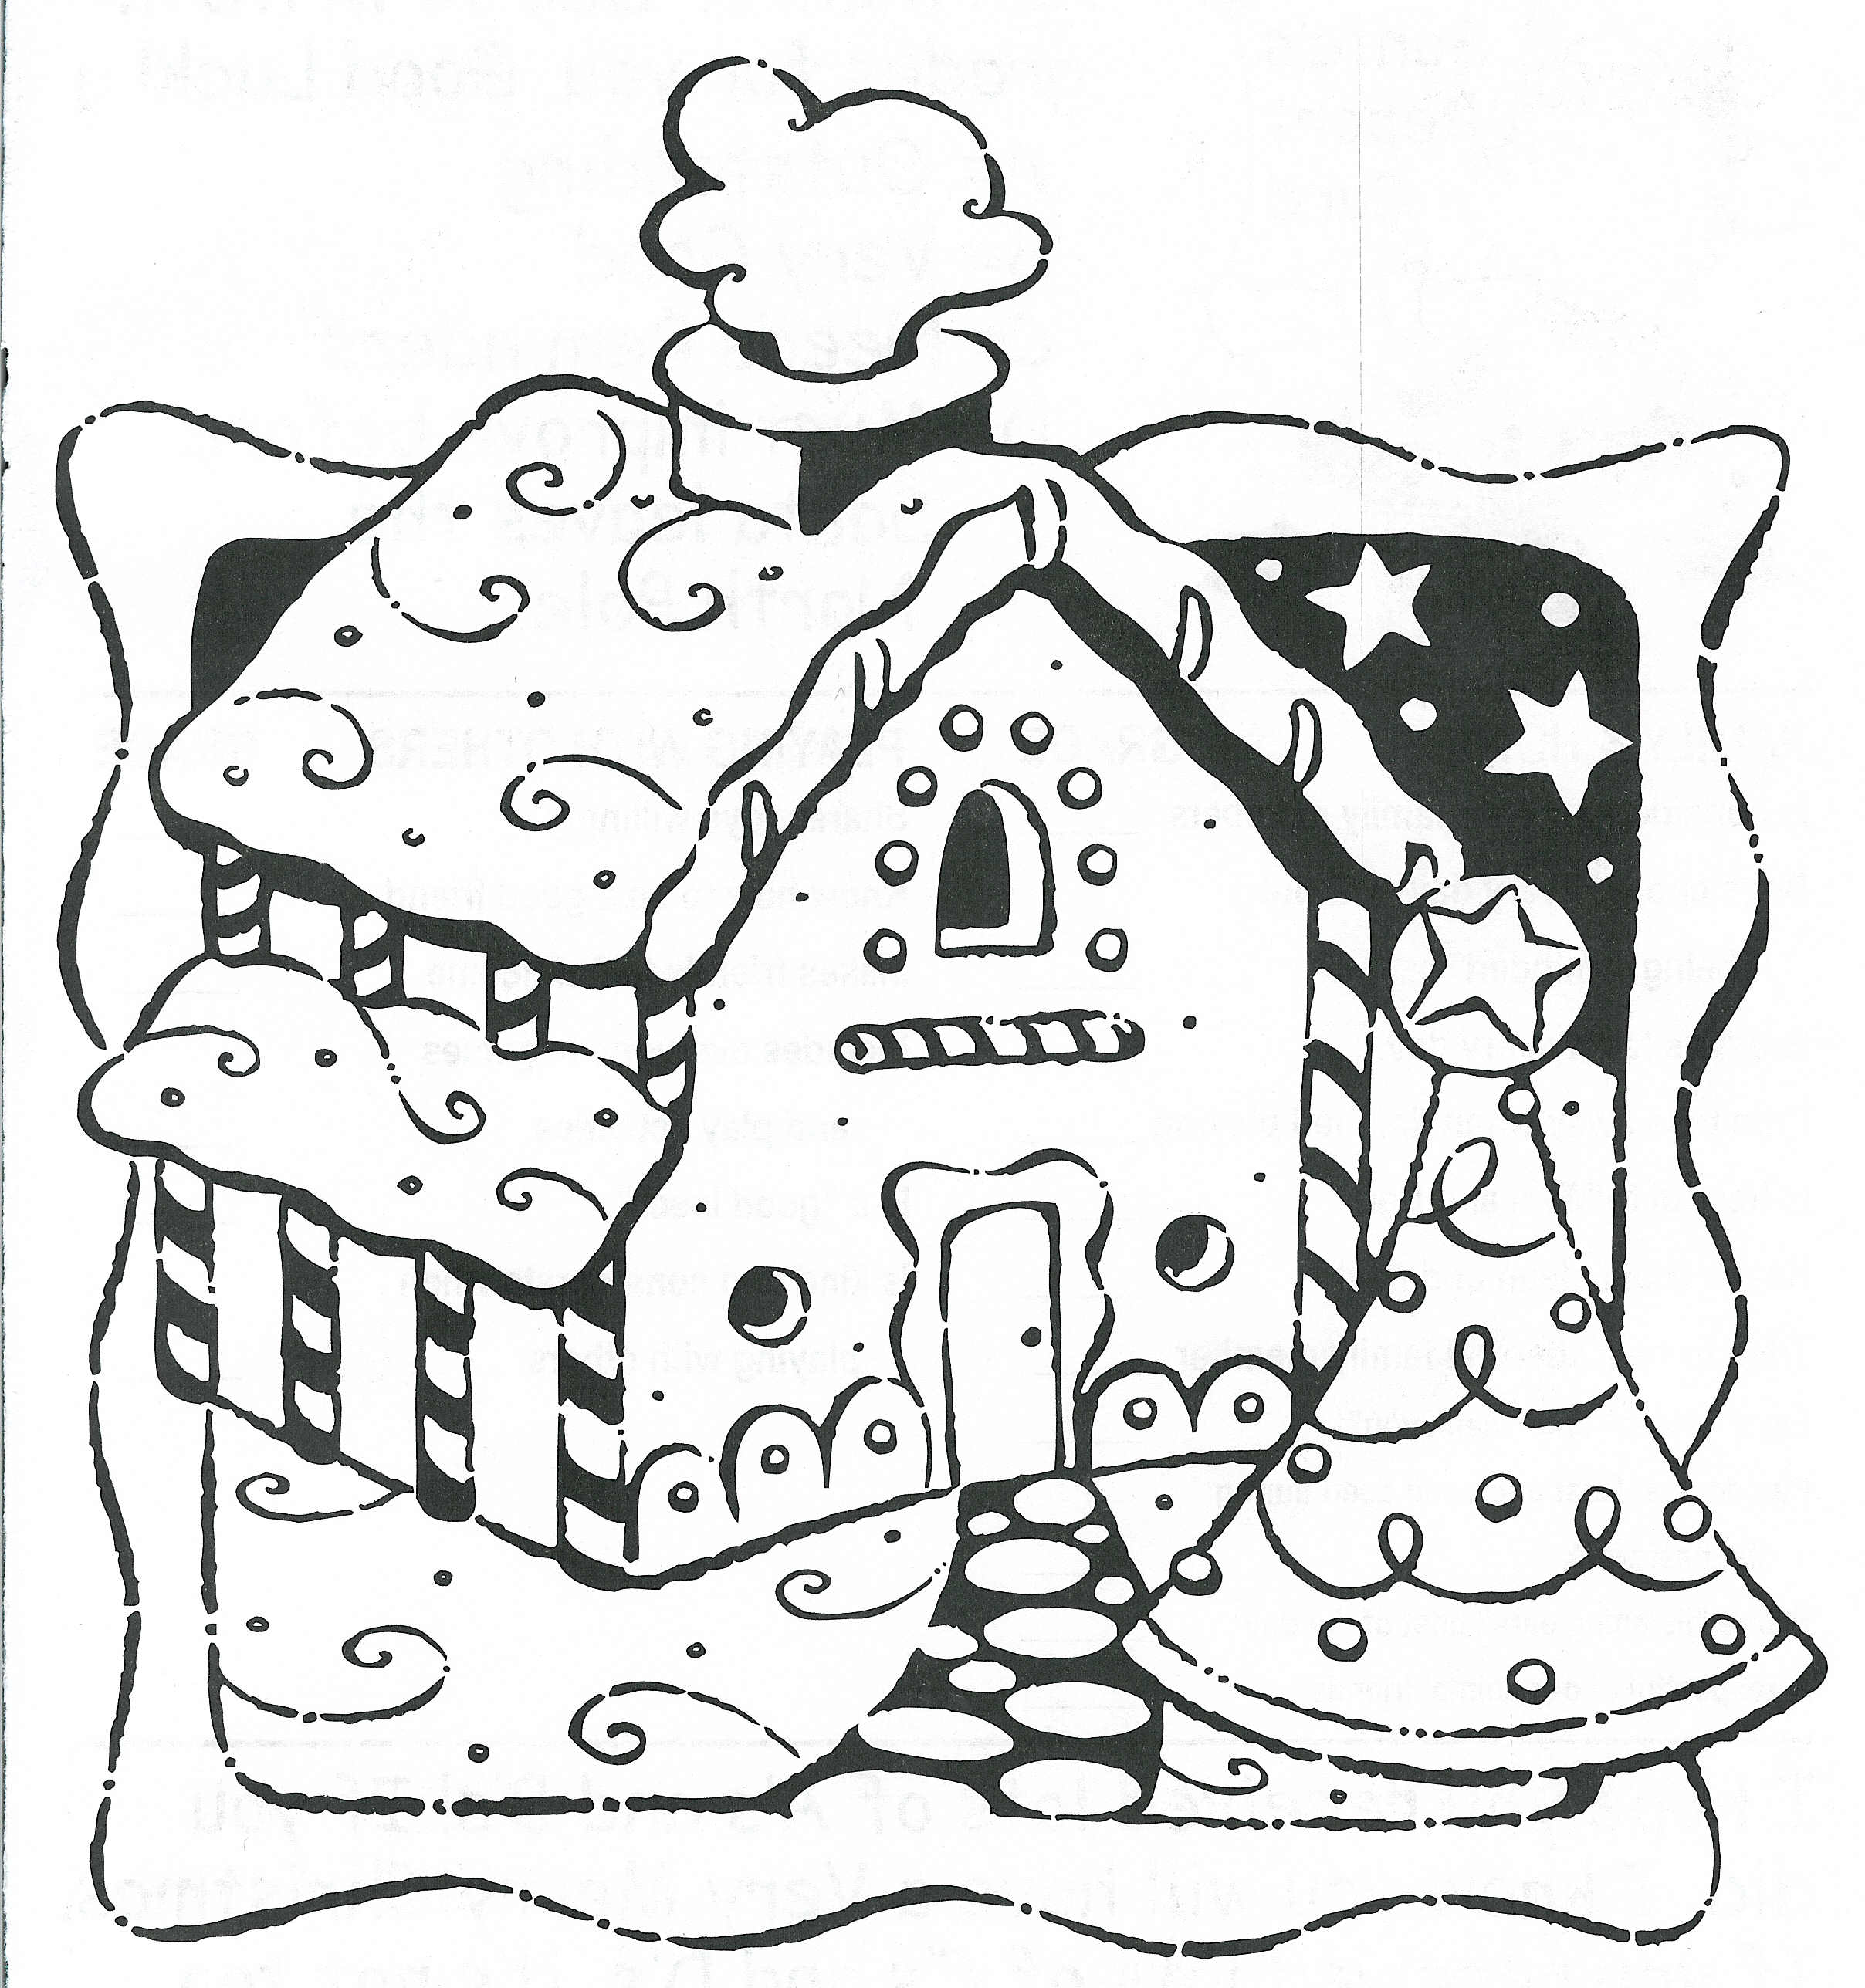 Free Gingerbread House Coloring Page Printable Download Free Gingerbread House Coloring Page